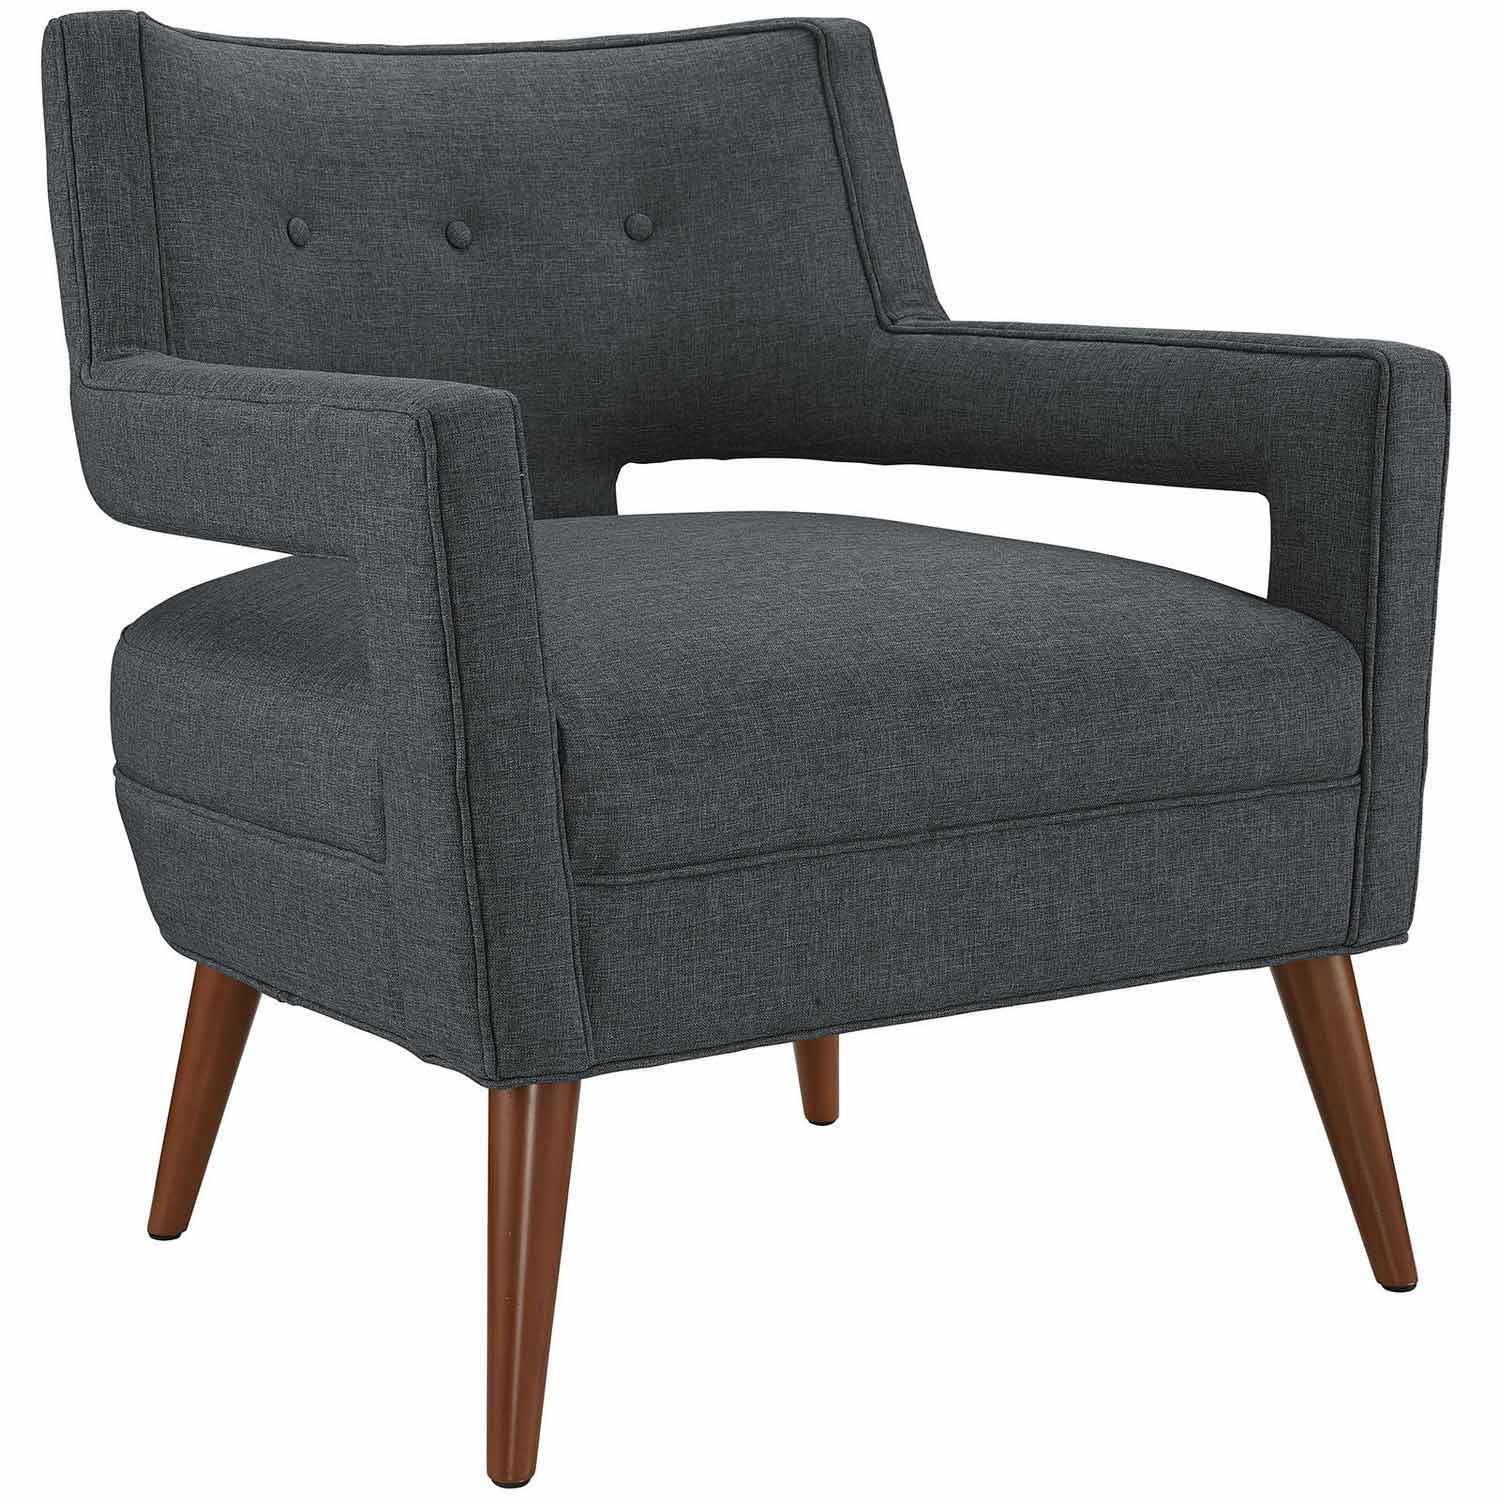 Modway Sheer Fabric Arm Chair - Gray